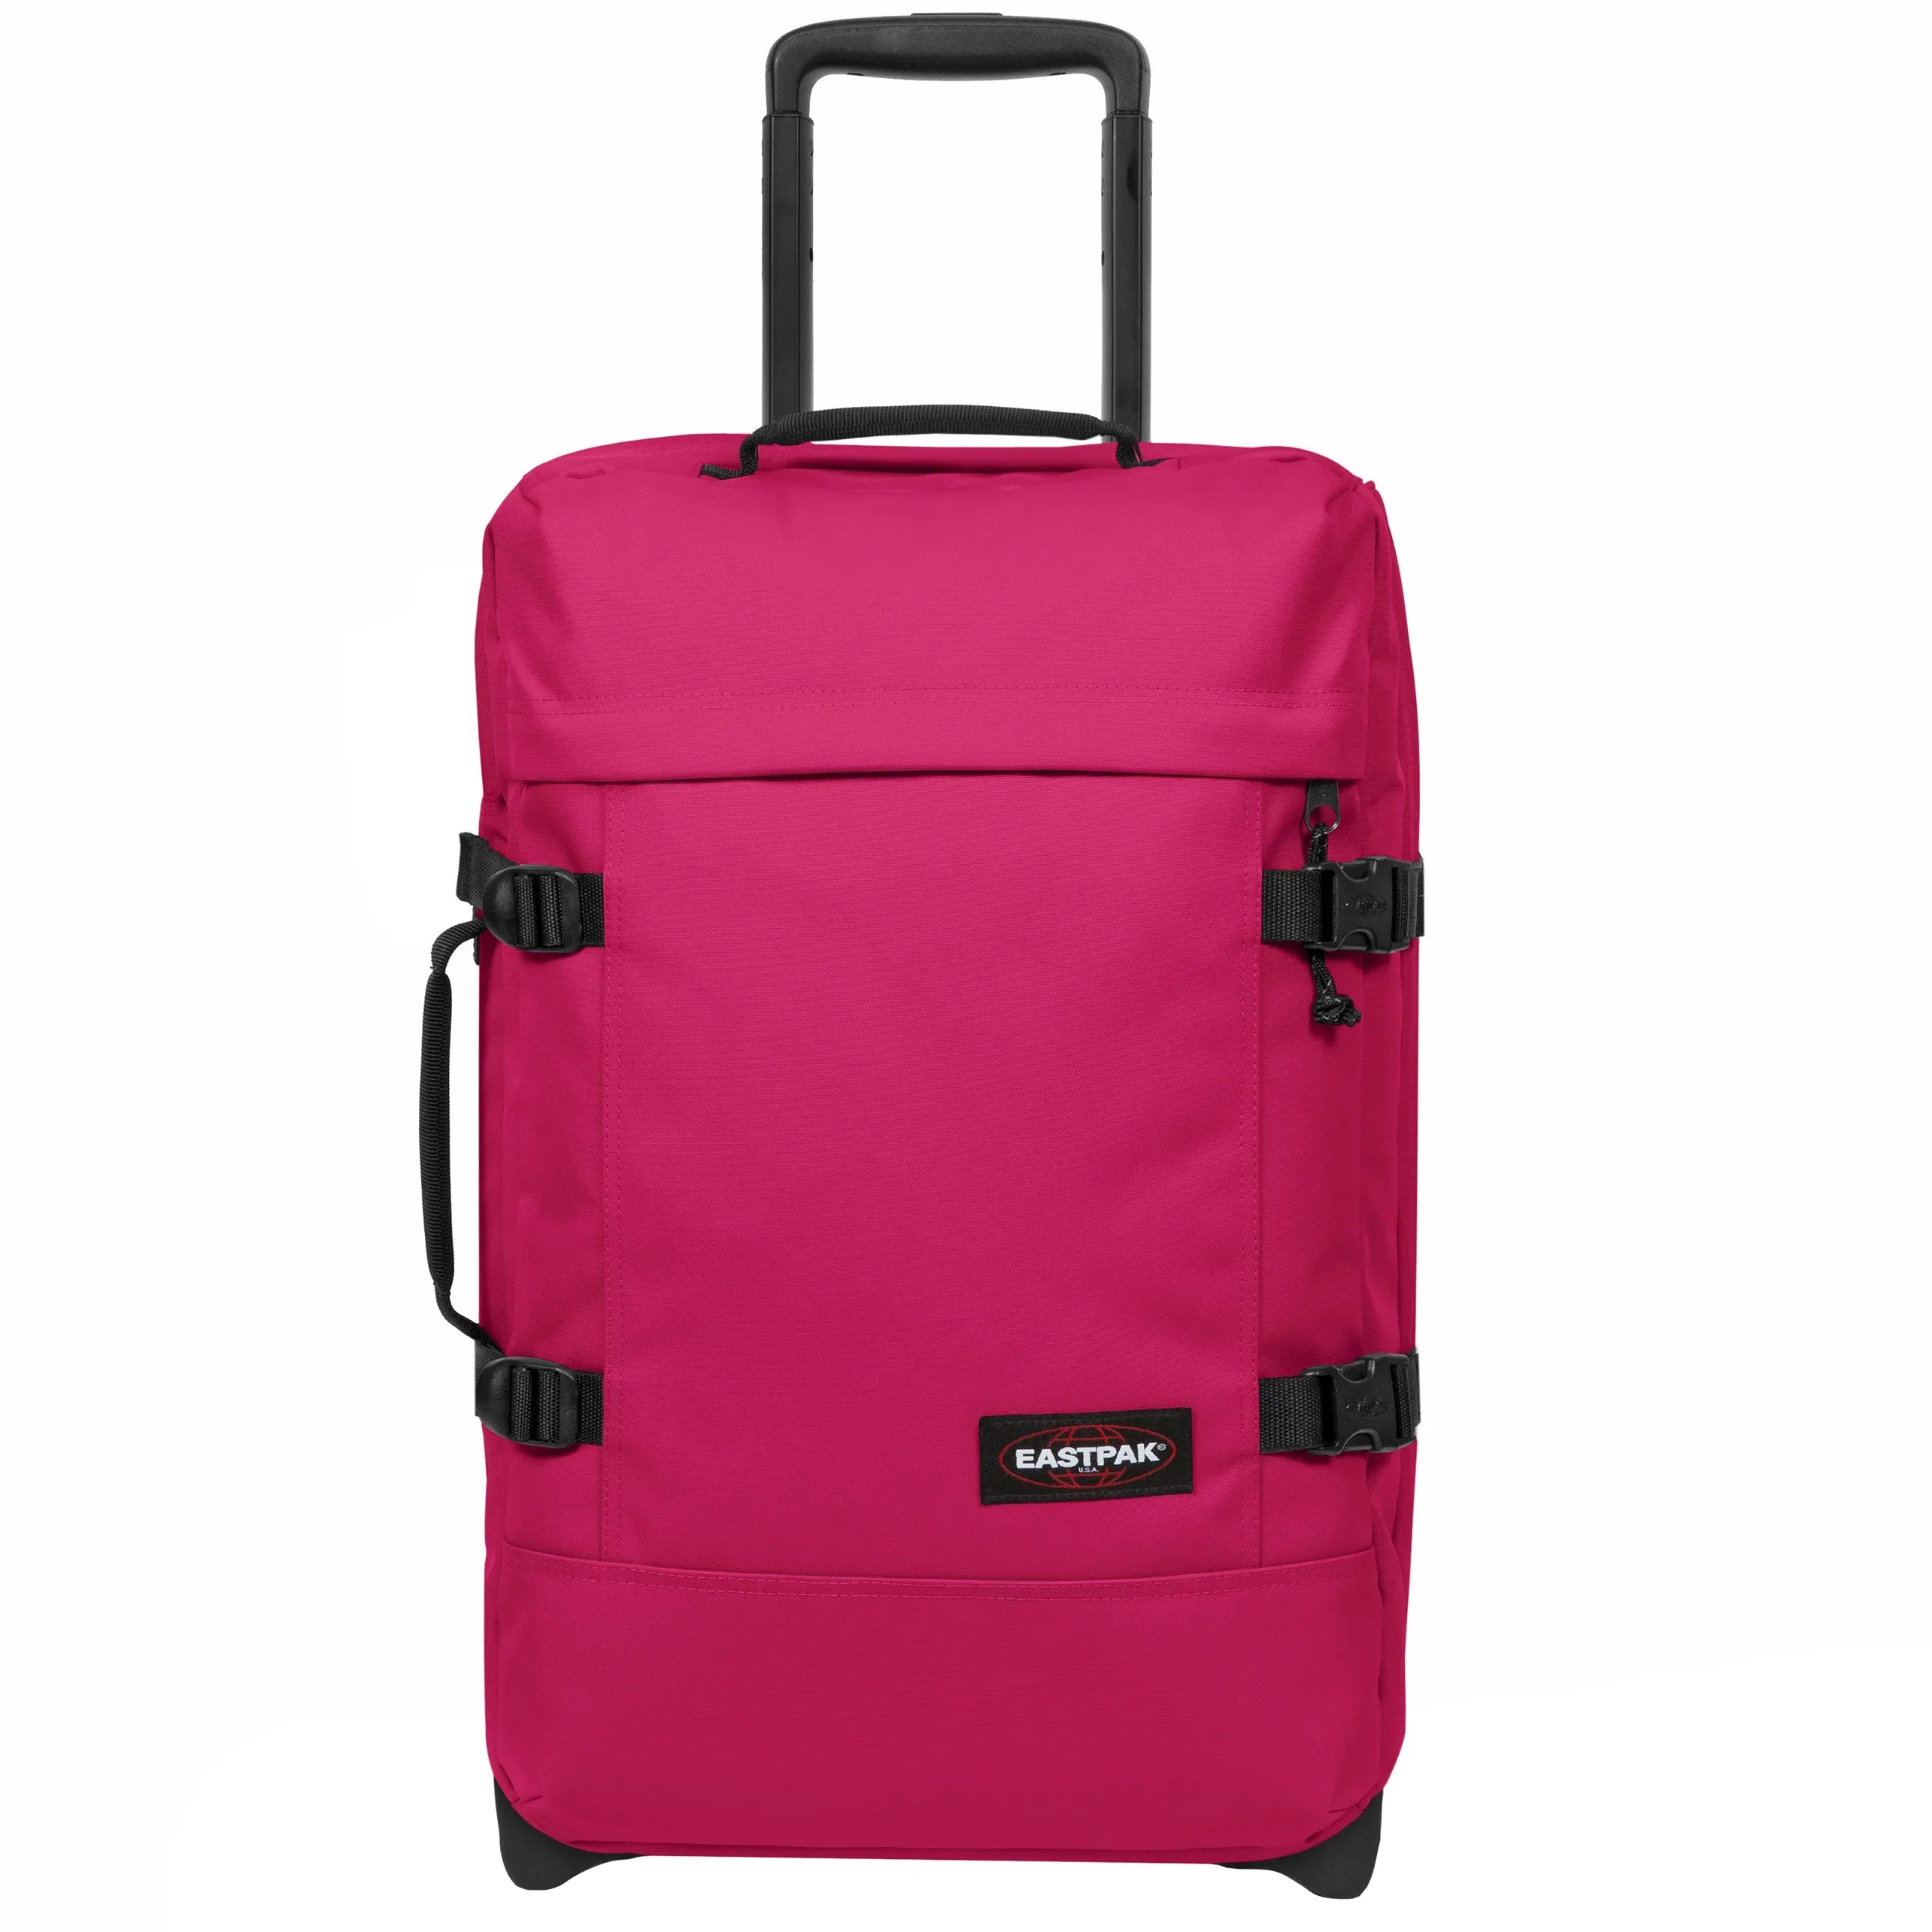 Eastpak Authentic Travel Tranverz Valise cabine 2 roues 51 cm - Ruby Pink